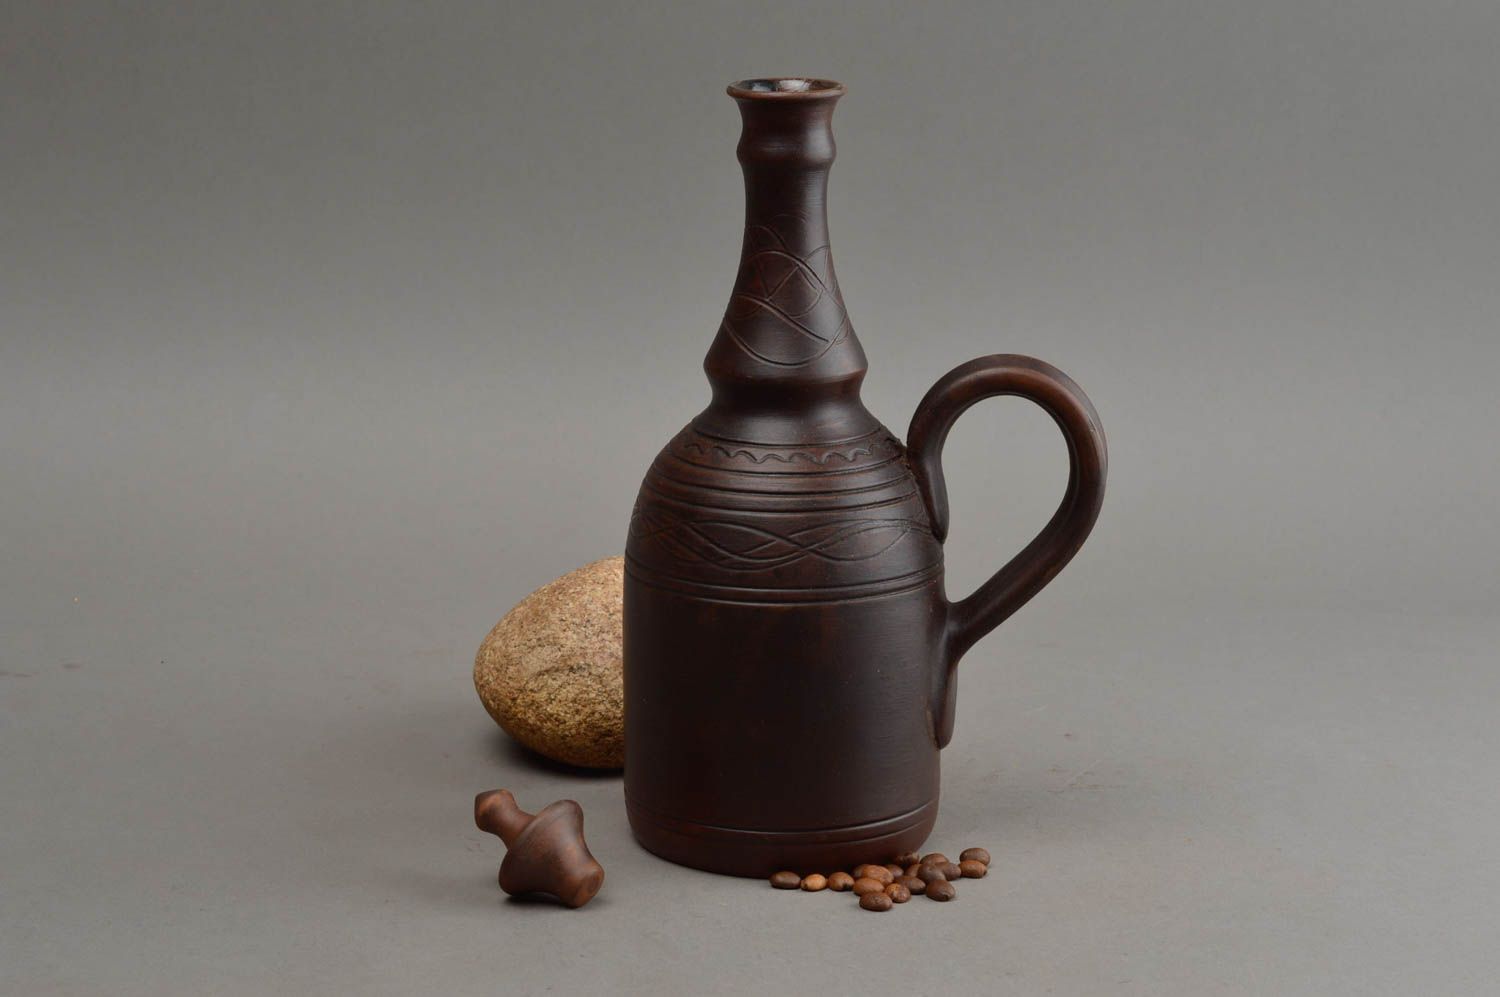 30 oz ceramic wine bottle pitcher with handle and lid in dark brown color and handmade pattern 1,5 lb photo 1